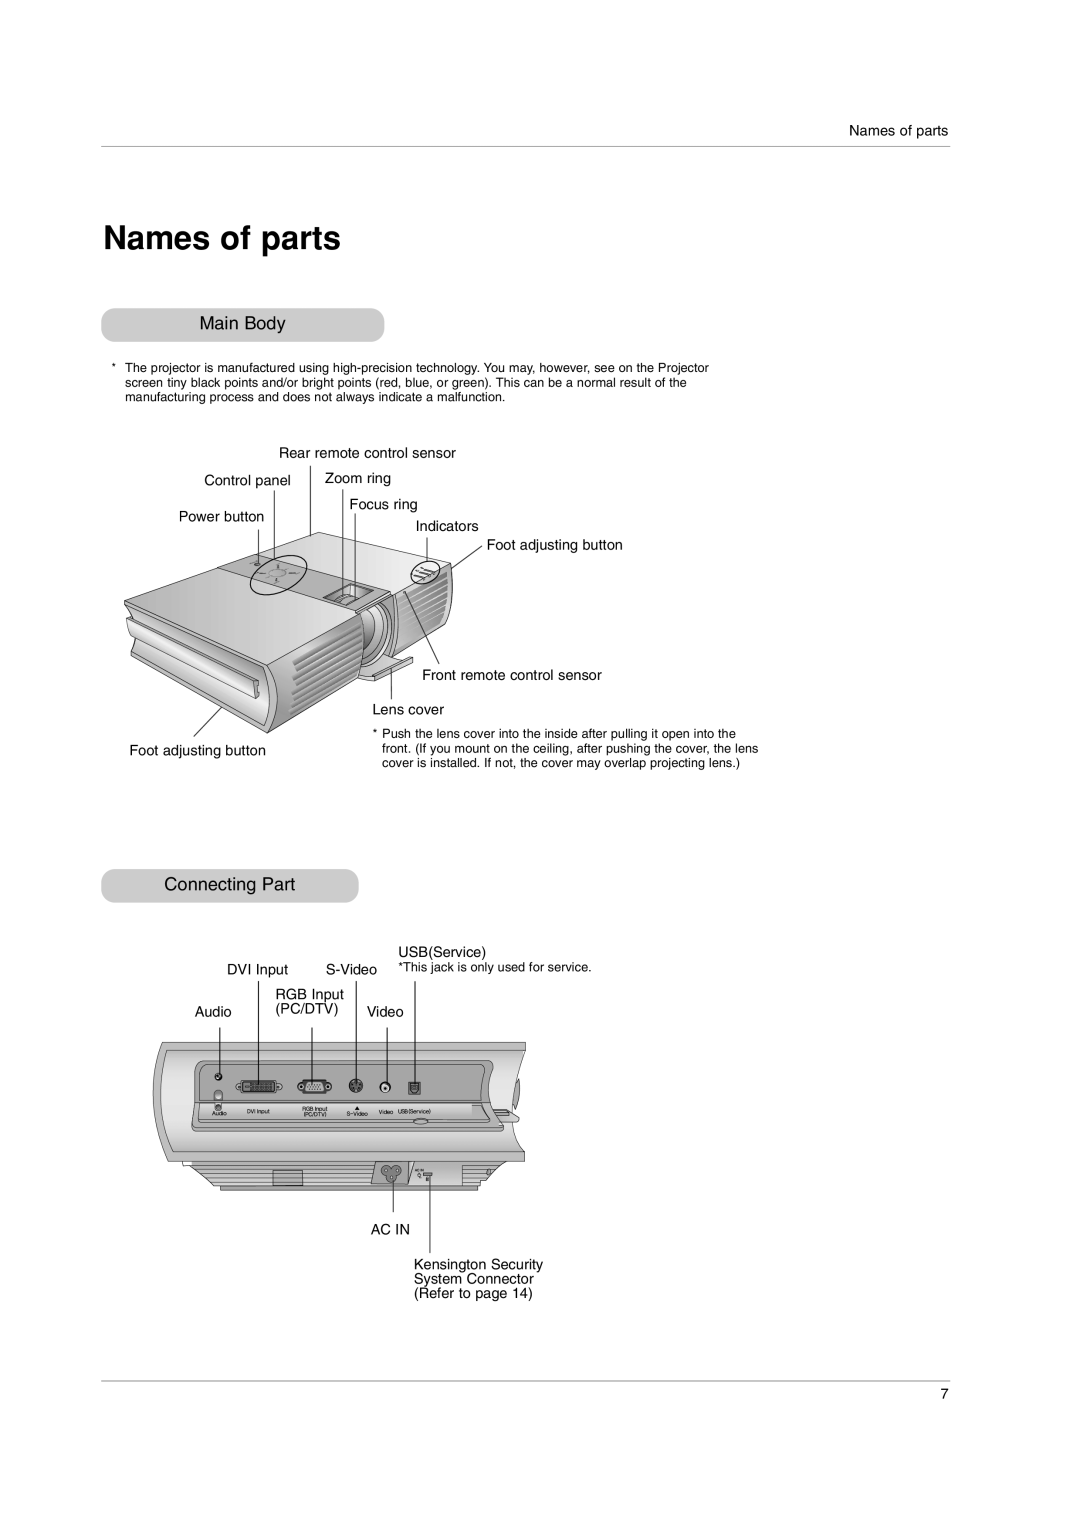 LG Electronics RD-JT91, RD-JT92 owner manual Names of parts, Main Body, Connecting Part 